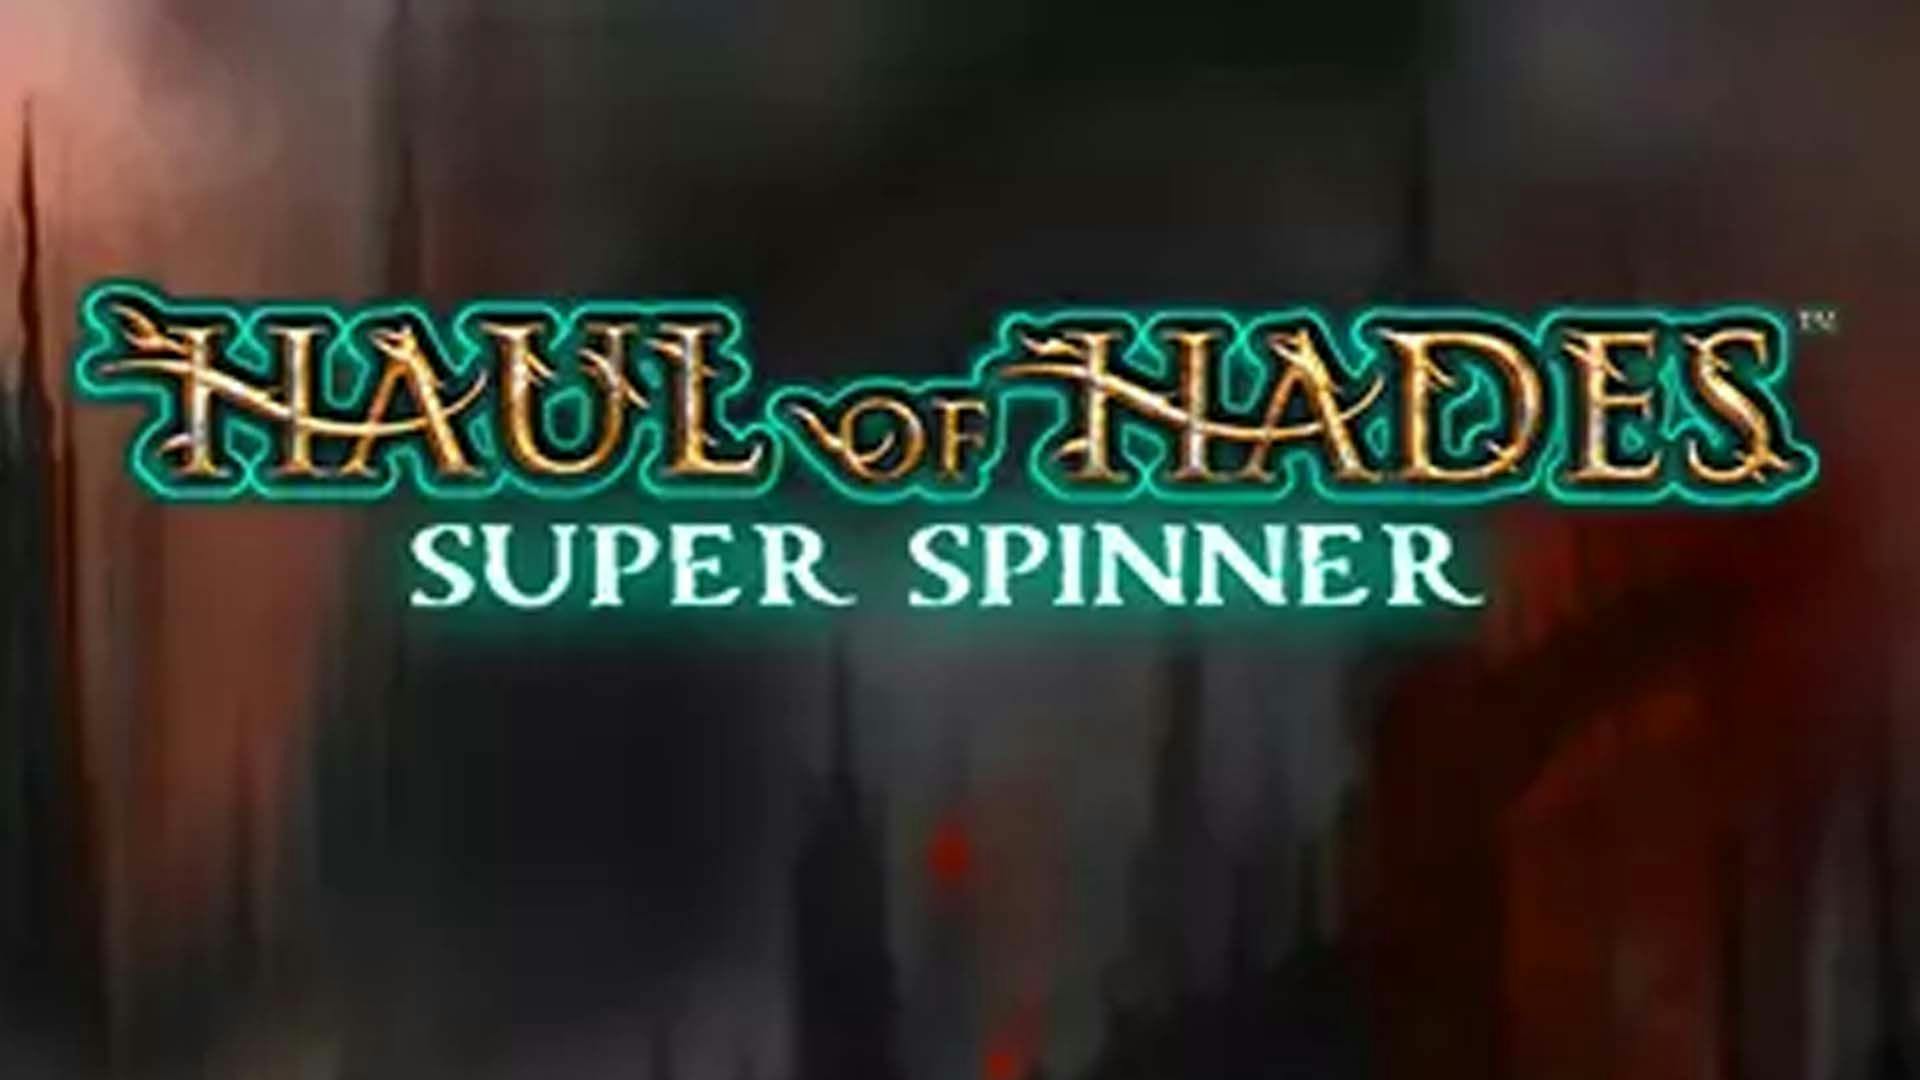 Haul of Hades - Super Spinner Slot Online Free Play